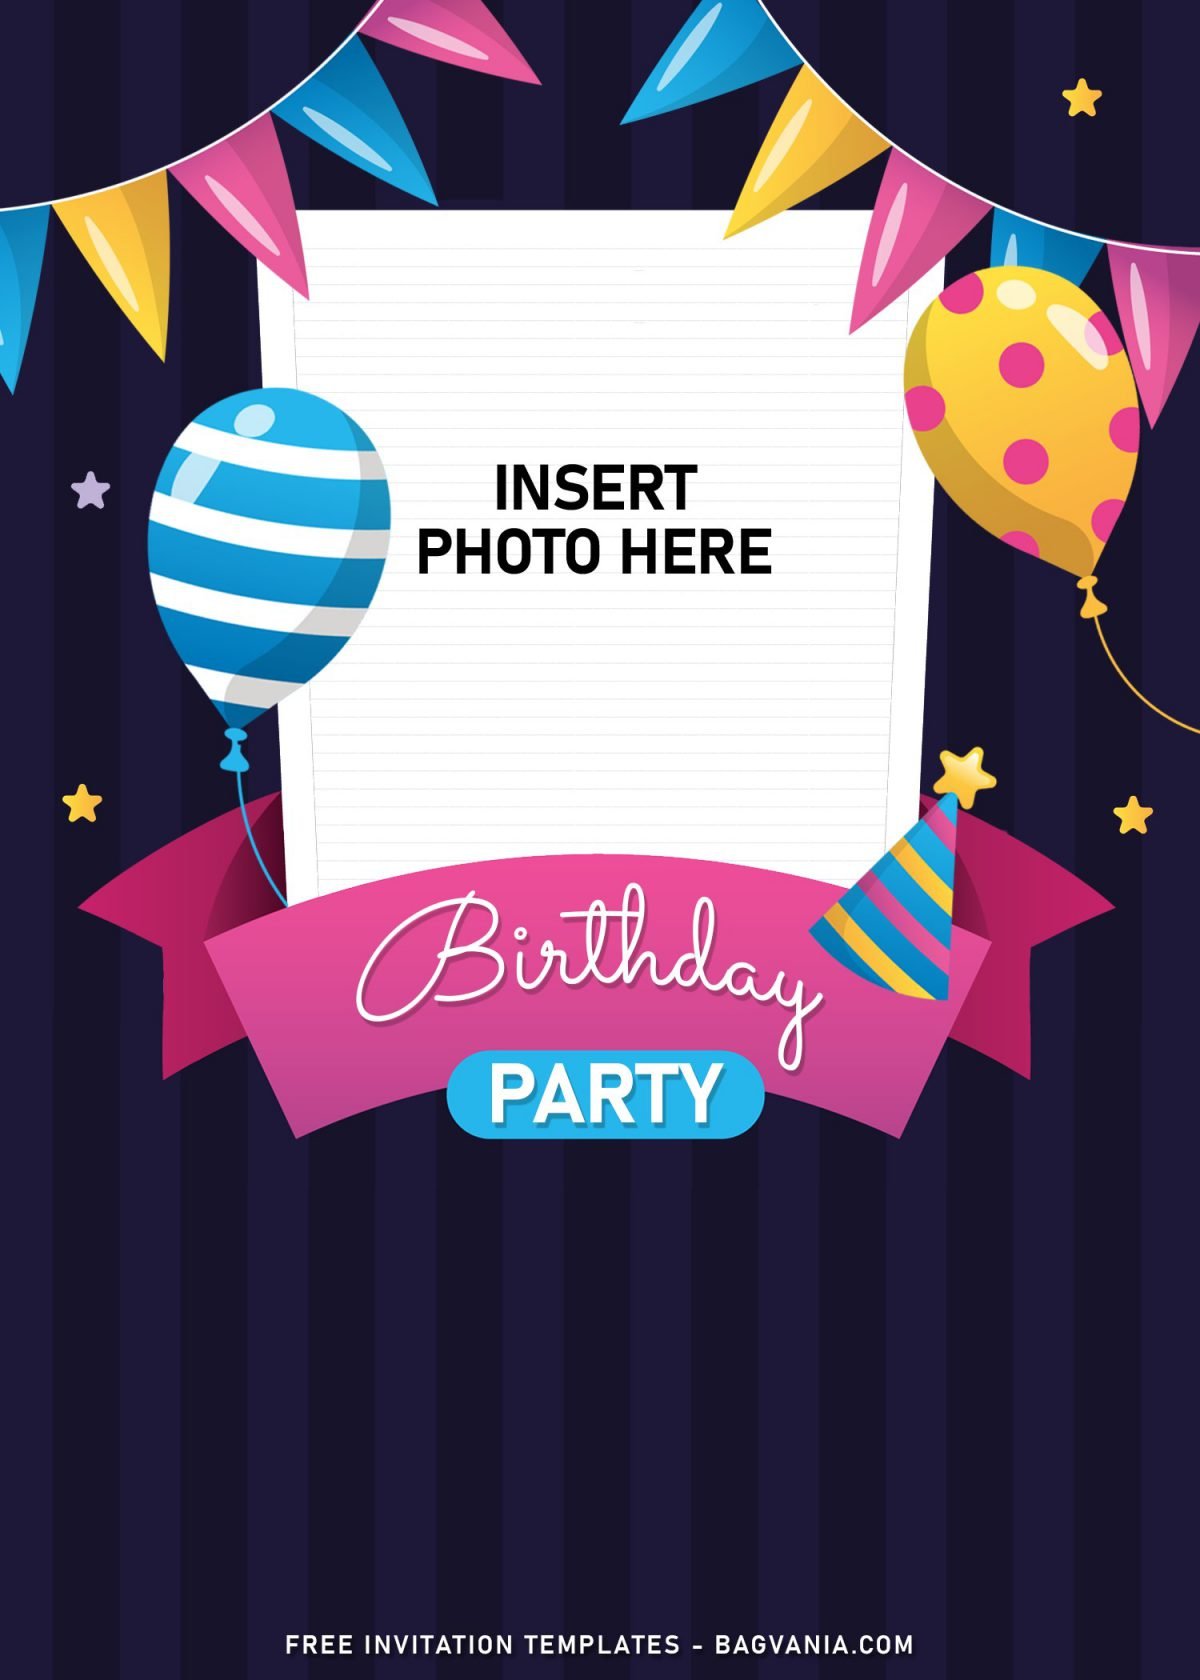 11+ Fun Birthday Invitation Templates For Your Kid’s Upcoming Birthday Party and has birthday hats